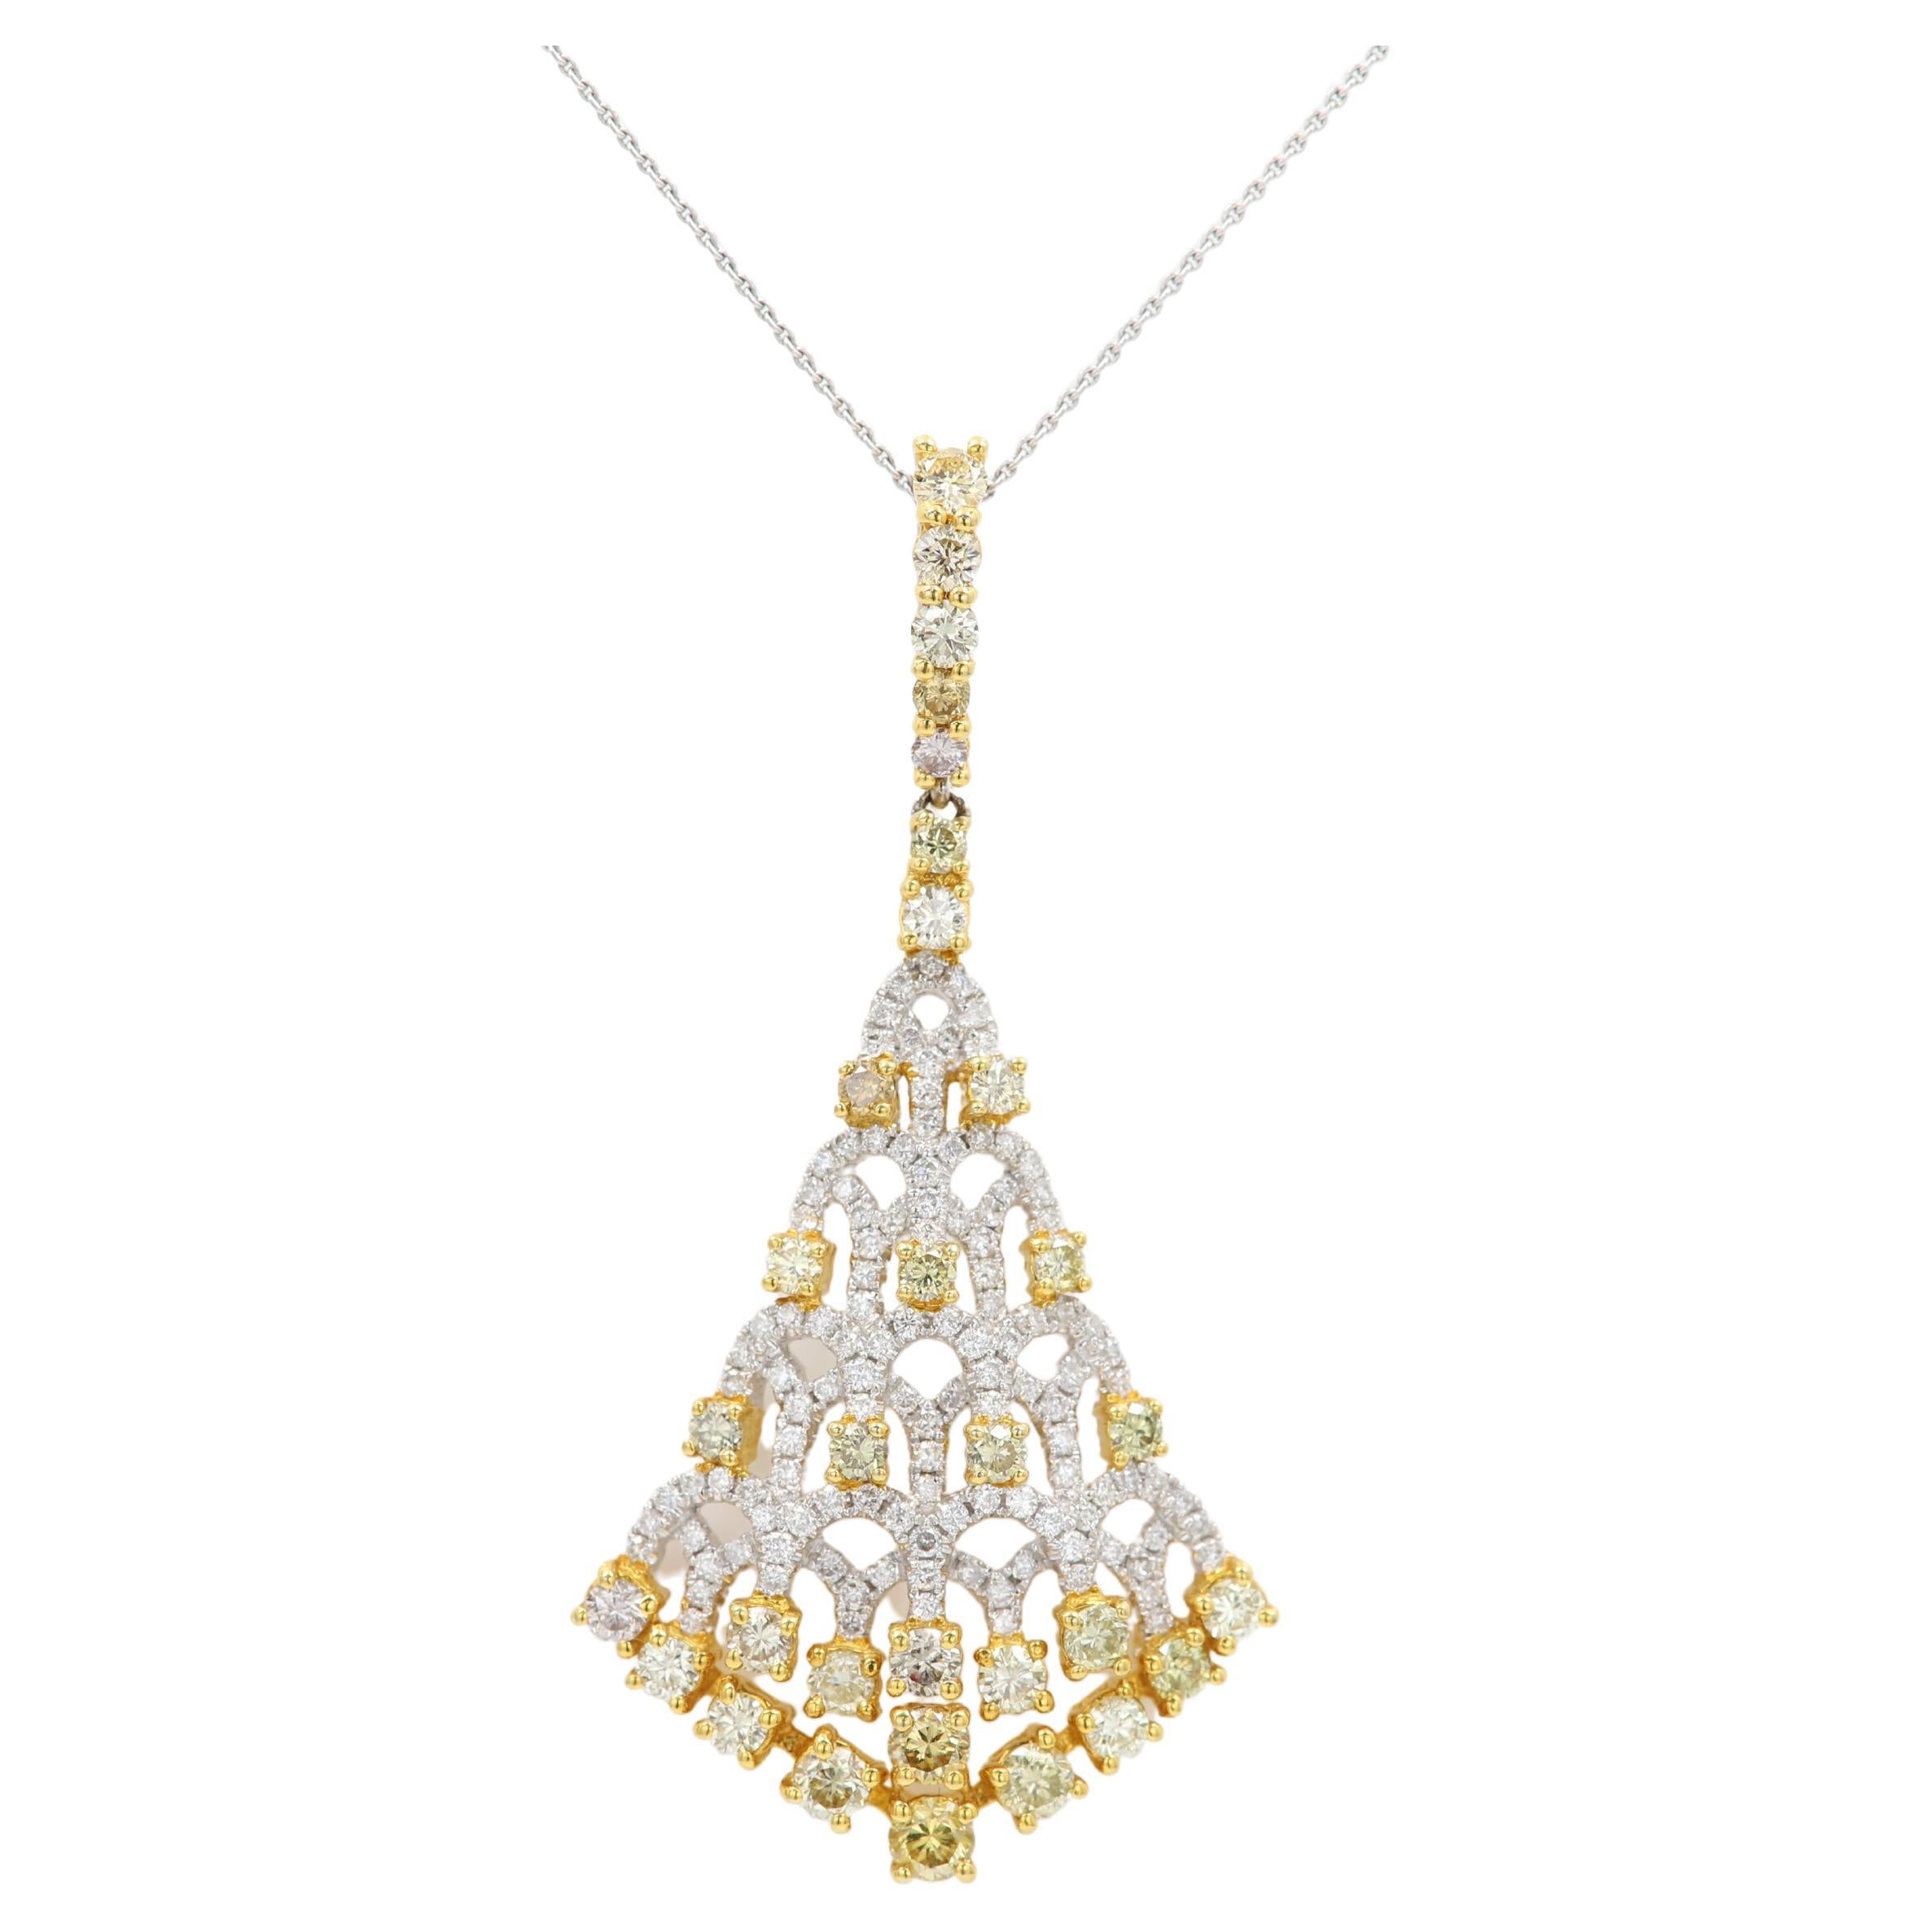 Dangle Yellow Diamond Pendant Necklace 18 Karat White and Yellow Gold  For Sale